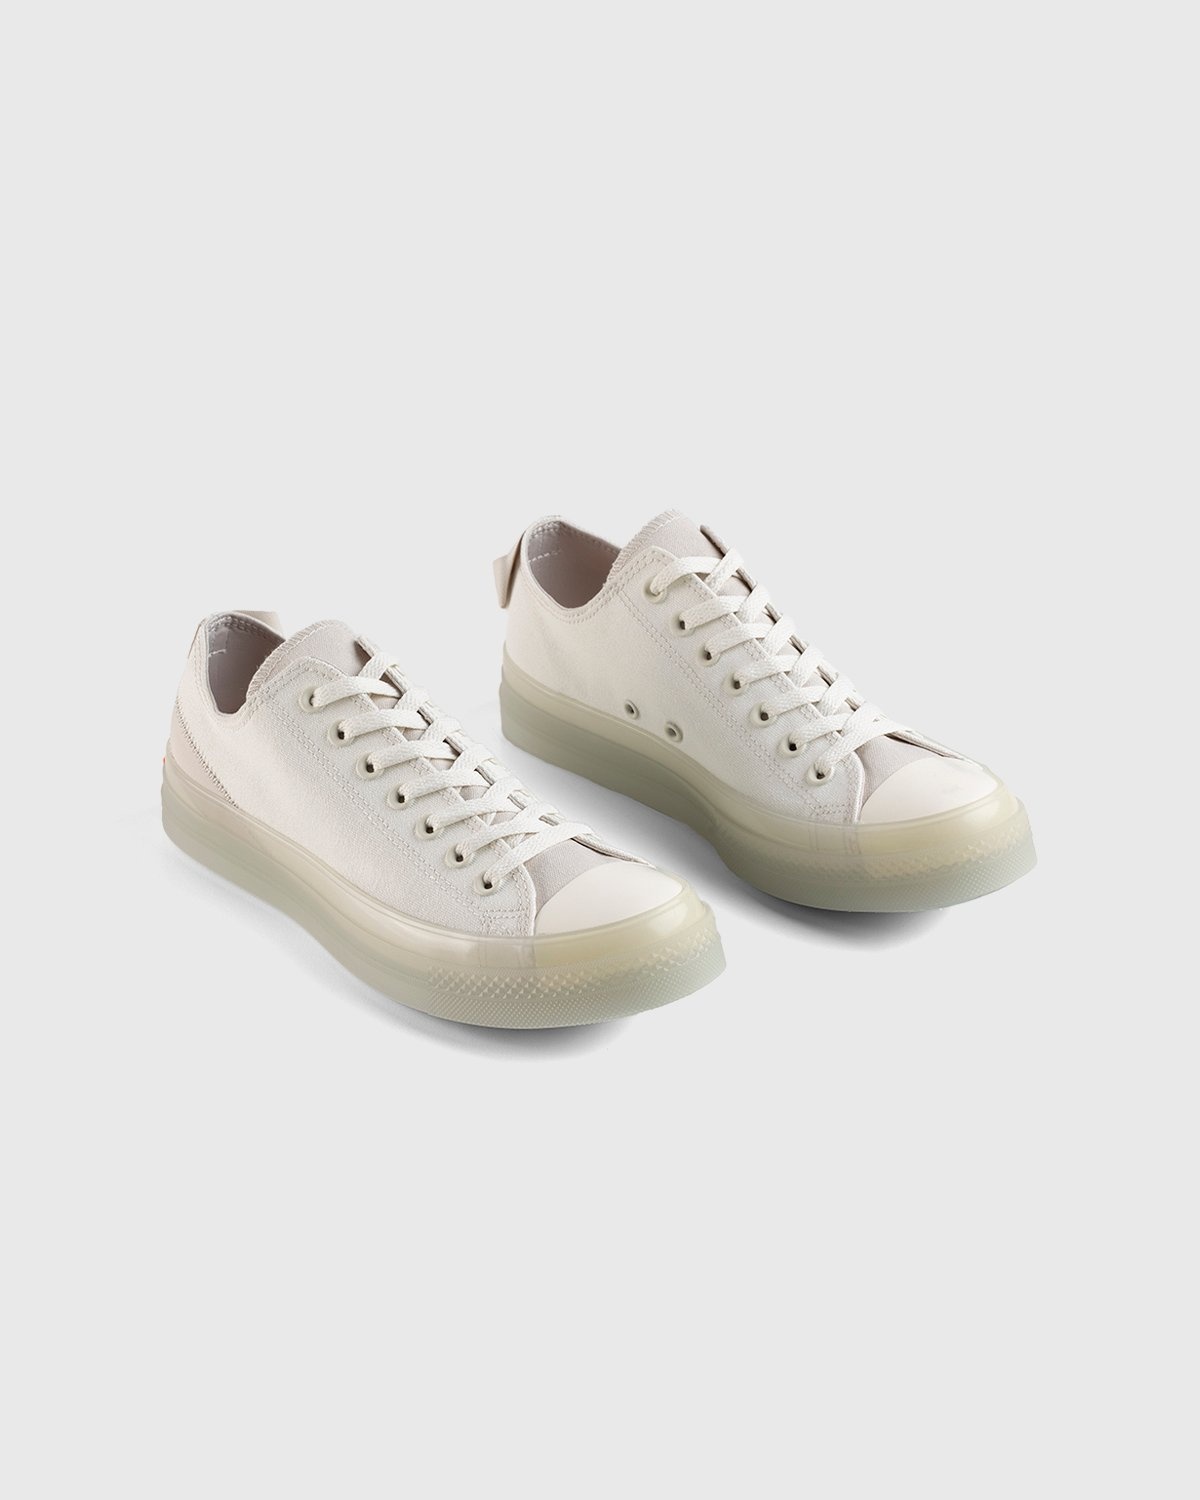 Converse – Chuck Taylor All Star CX Egret/Desert Sand - Sneakers - Grey - Image 4